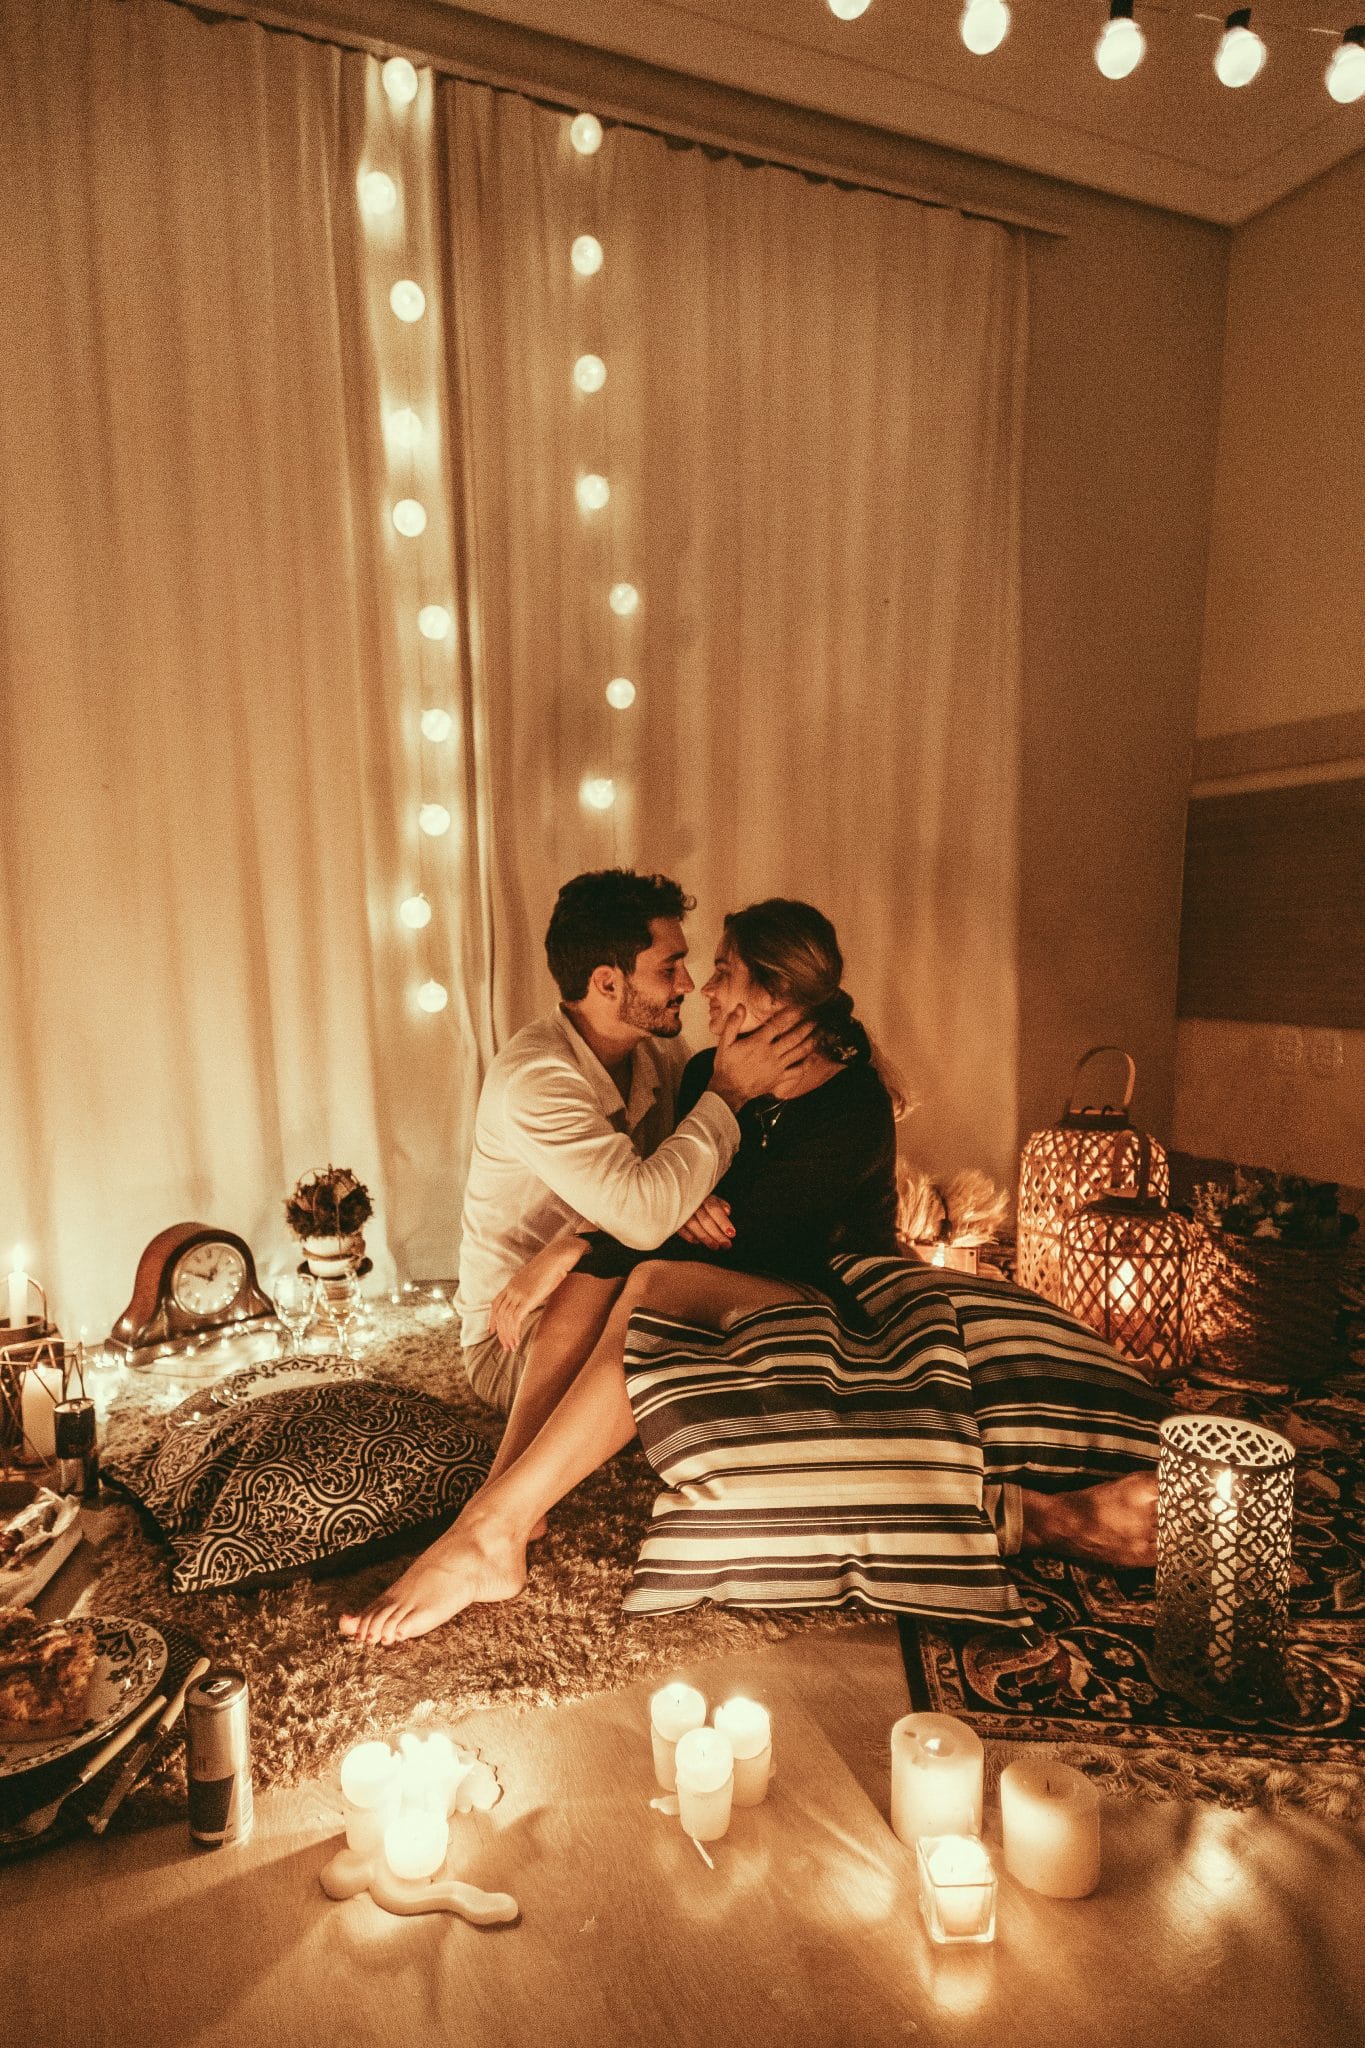 28 Best Home Date Night Ideas - Cheap Date Night at Home Ideas